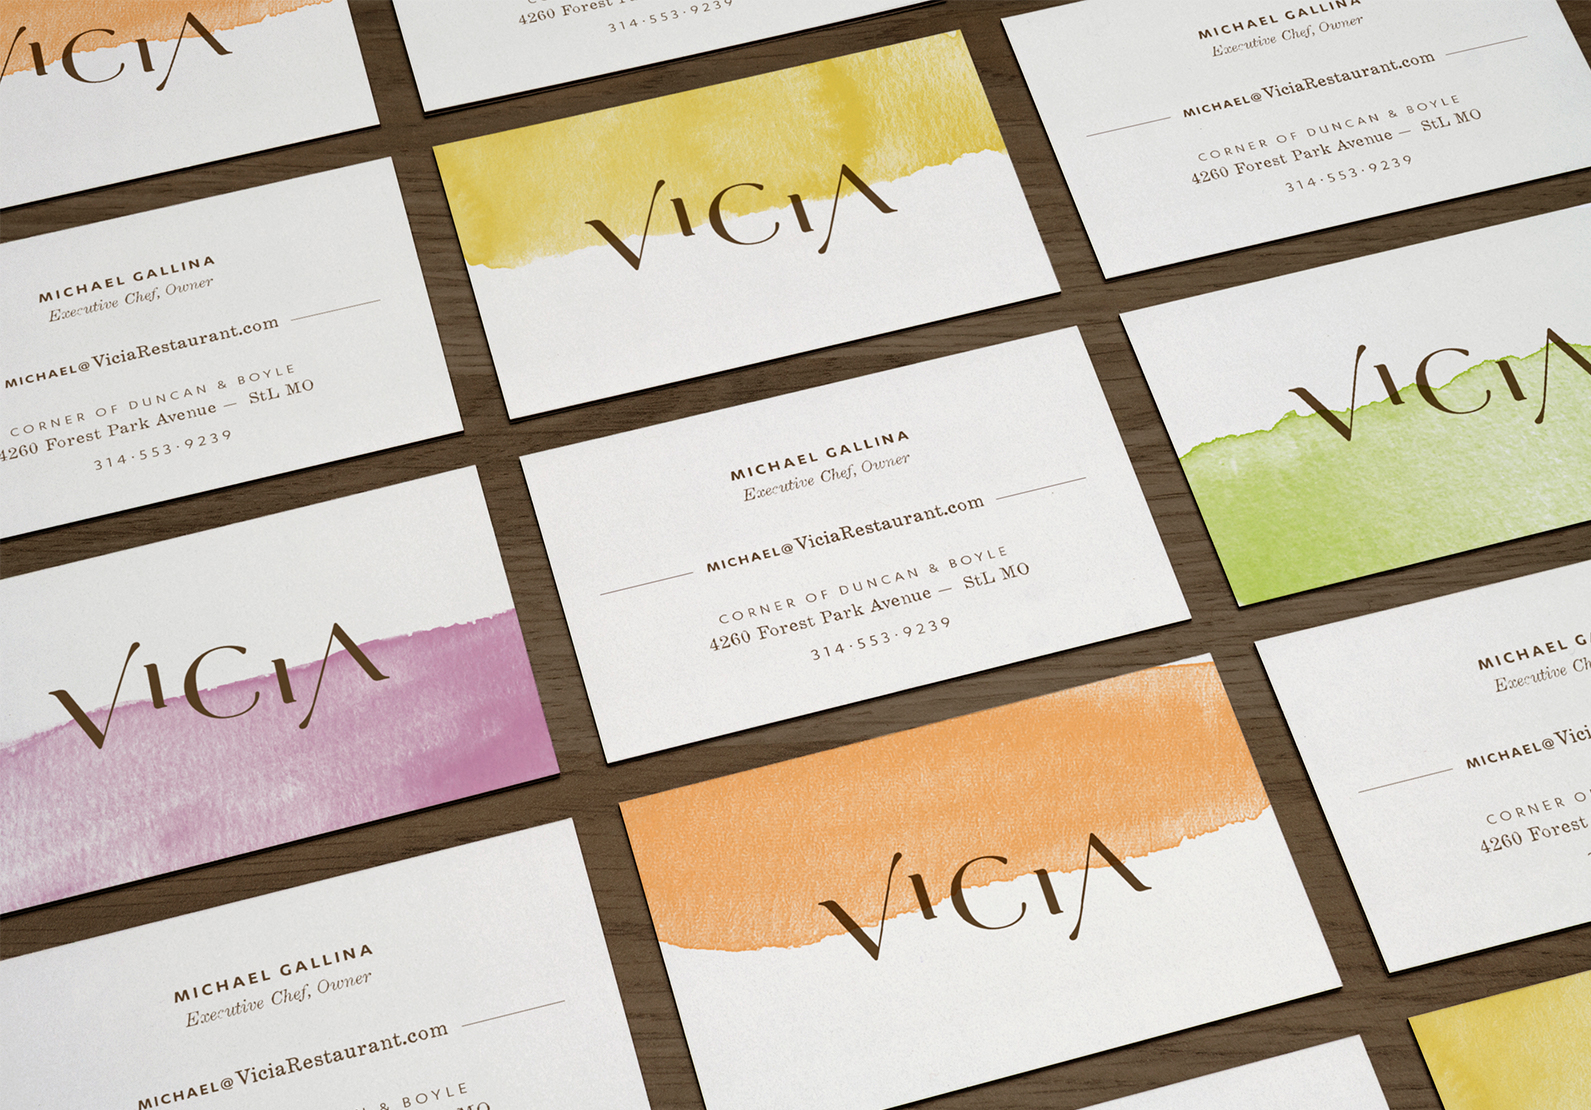 Vicia Business Cards flat lay